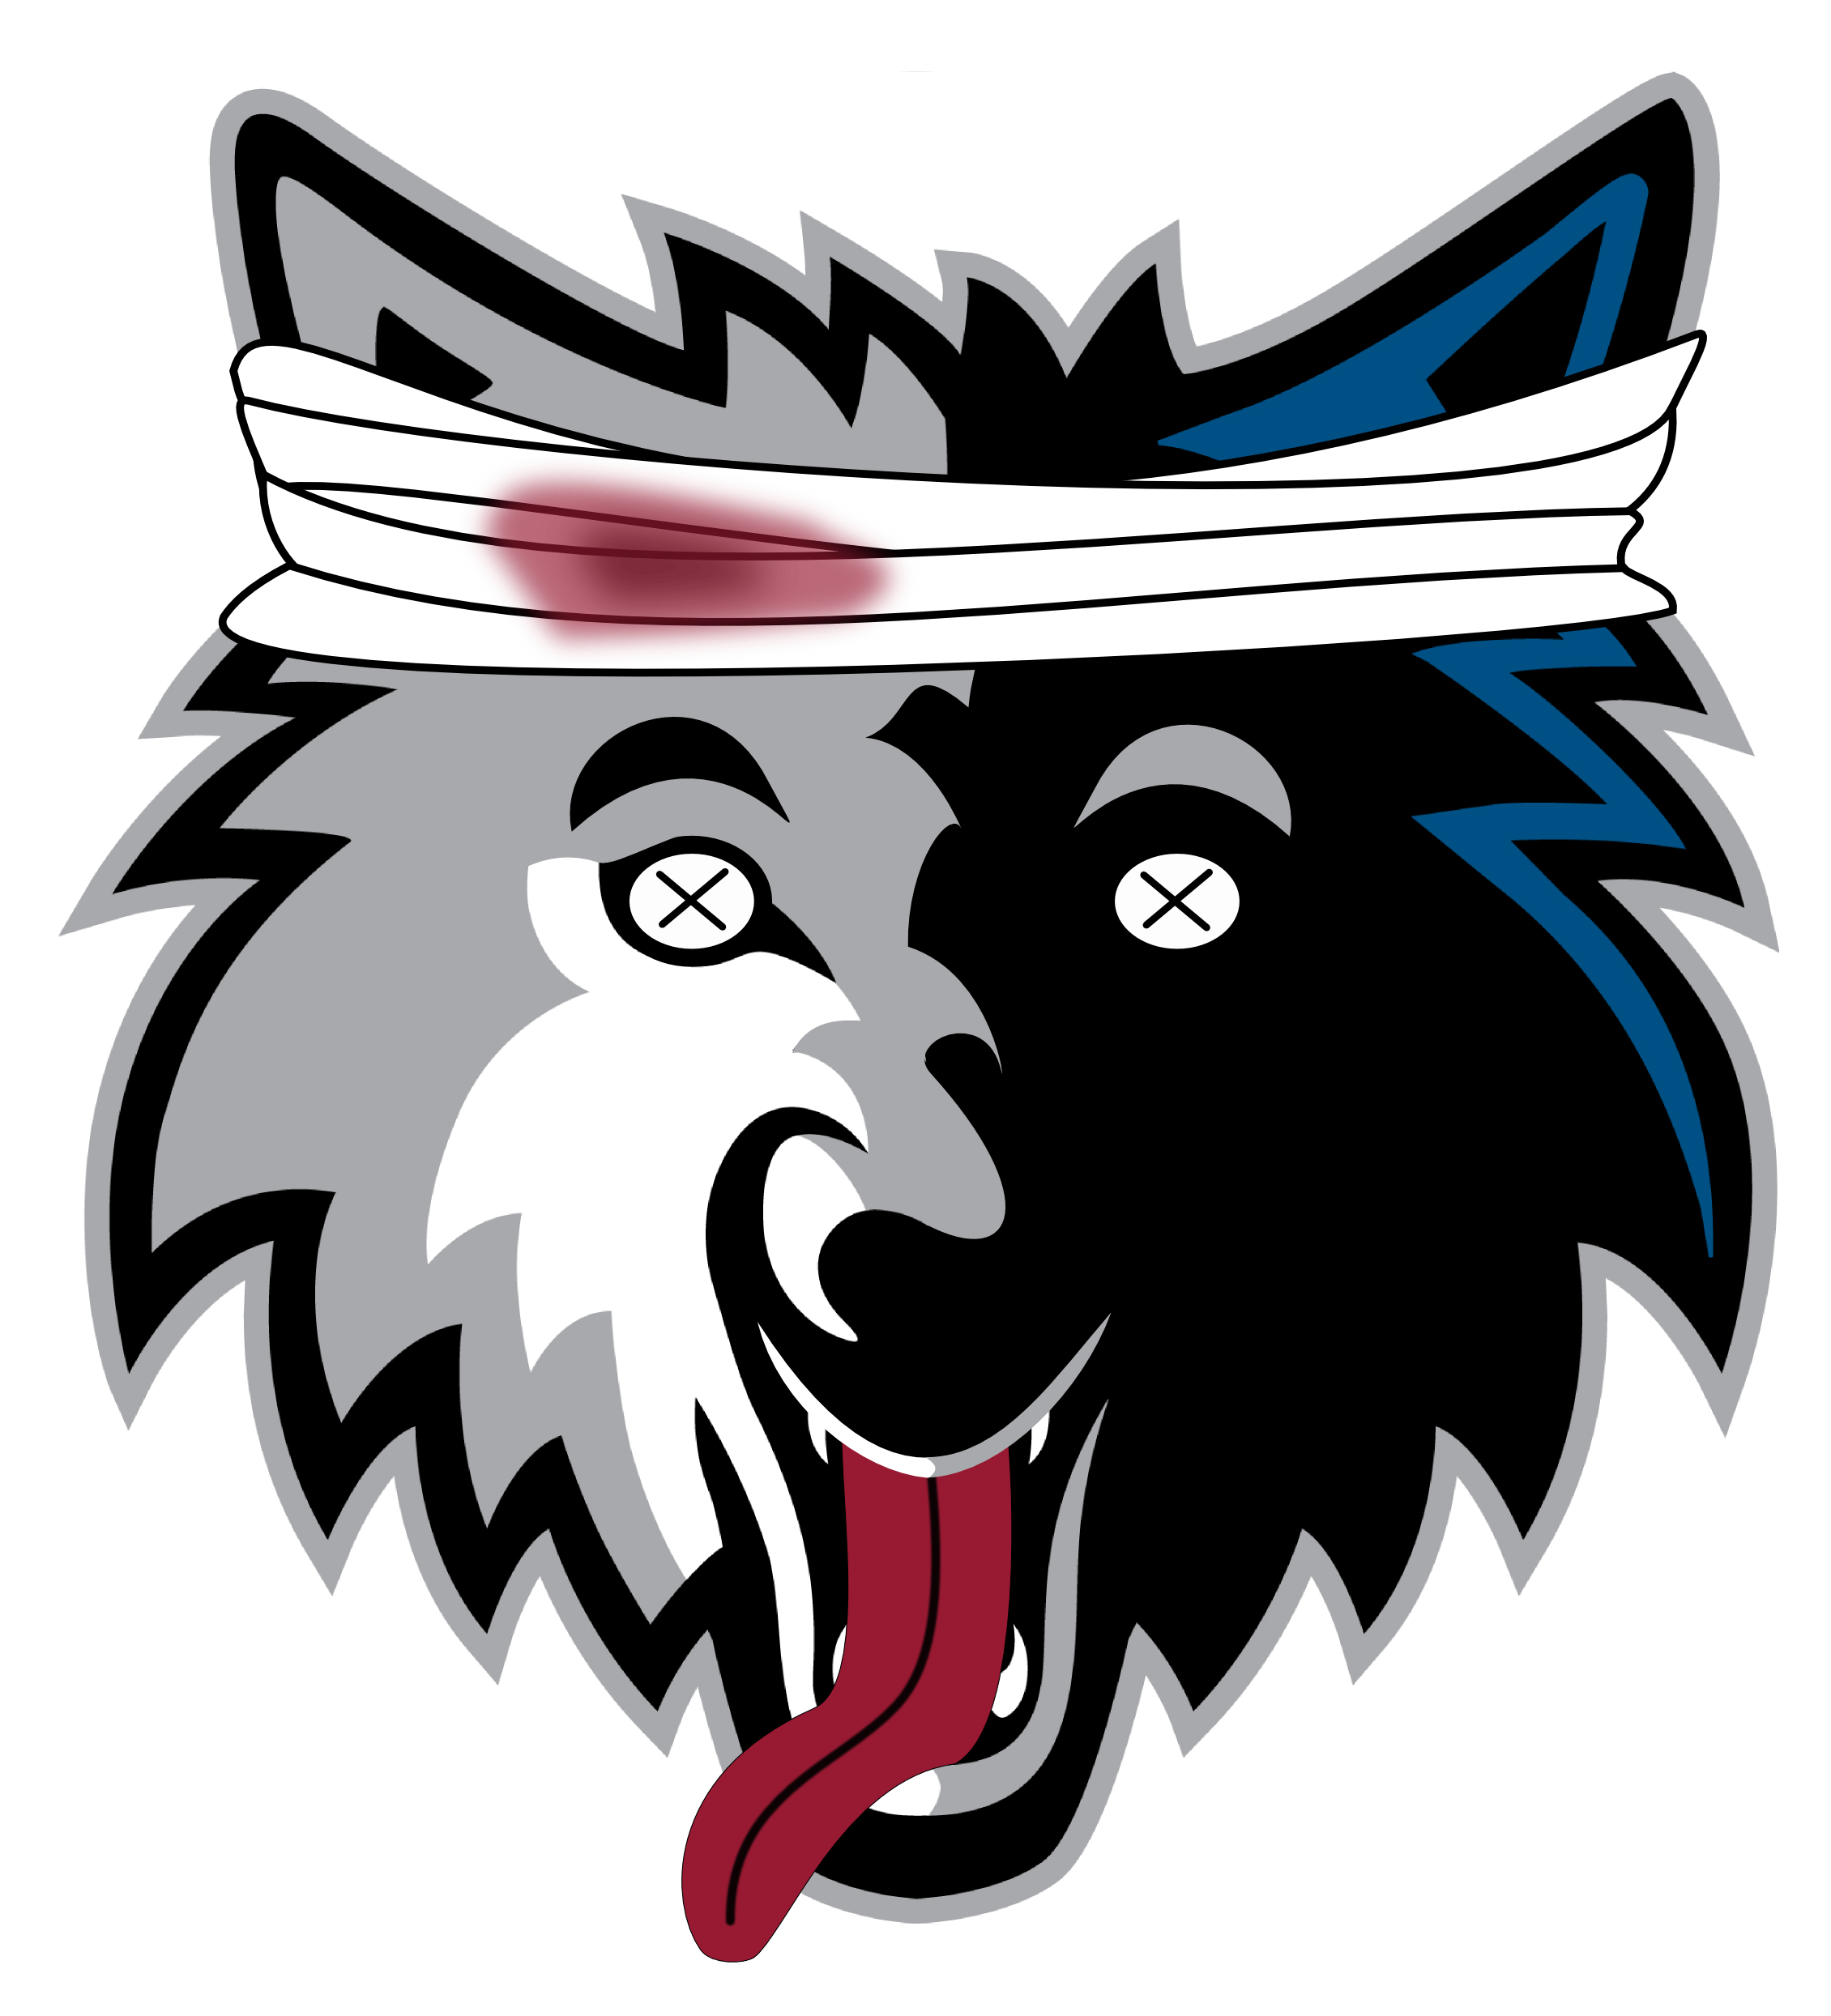 Twolves Logo - TIMBERWOLVES RELEASE NEW LOGO DESIGN WITH SEVEN GAMES LEFT IN TEAM'S